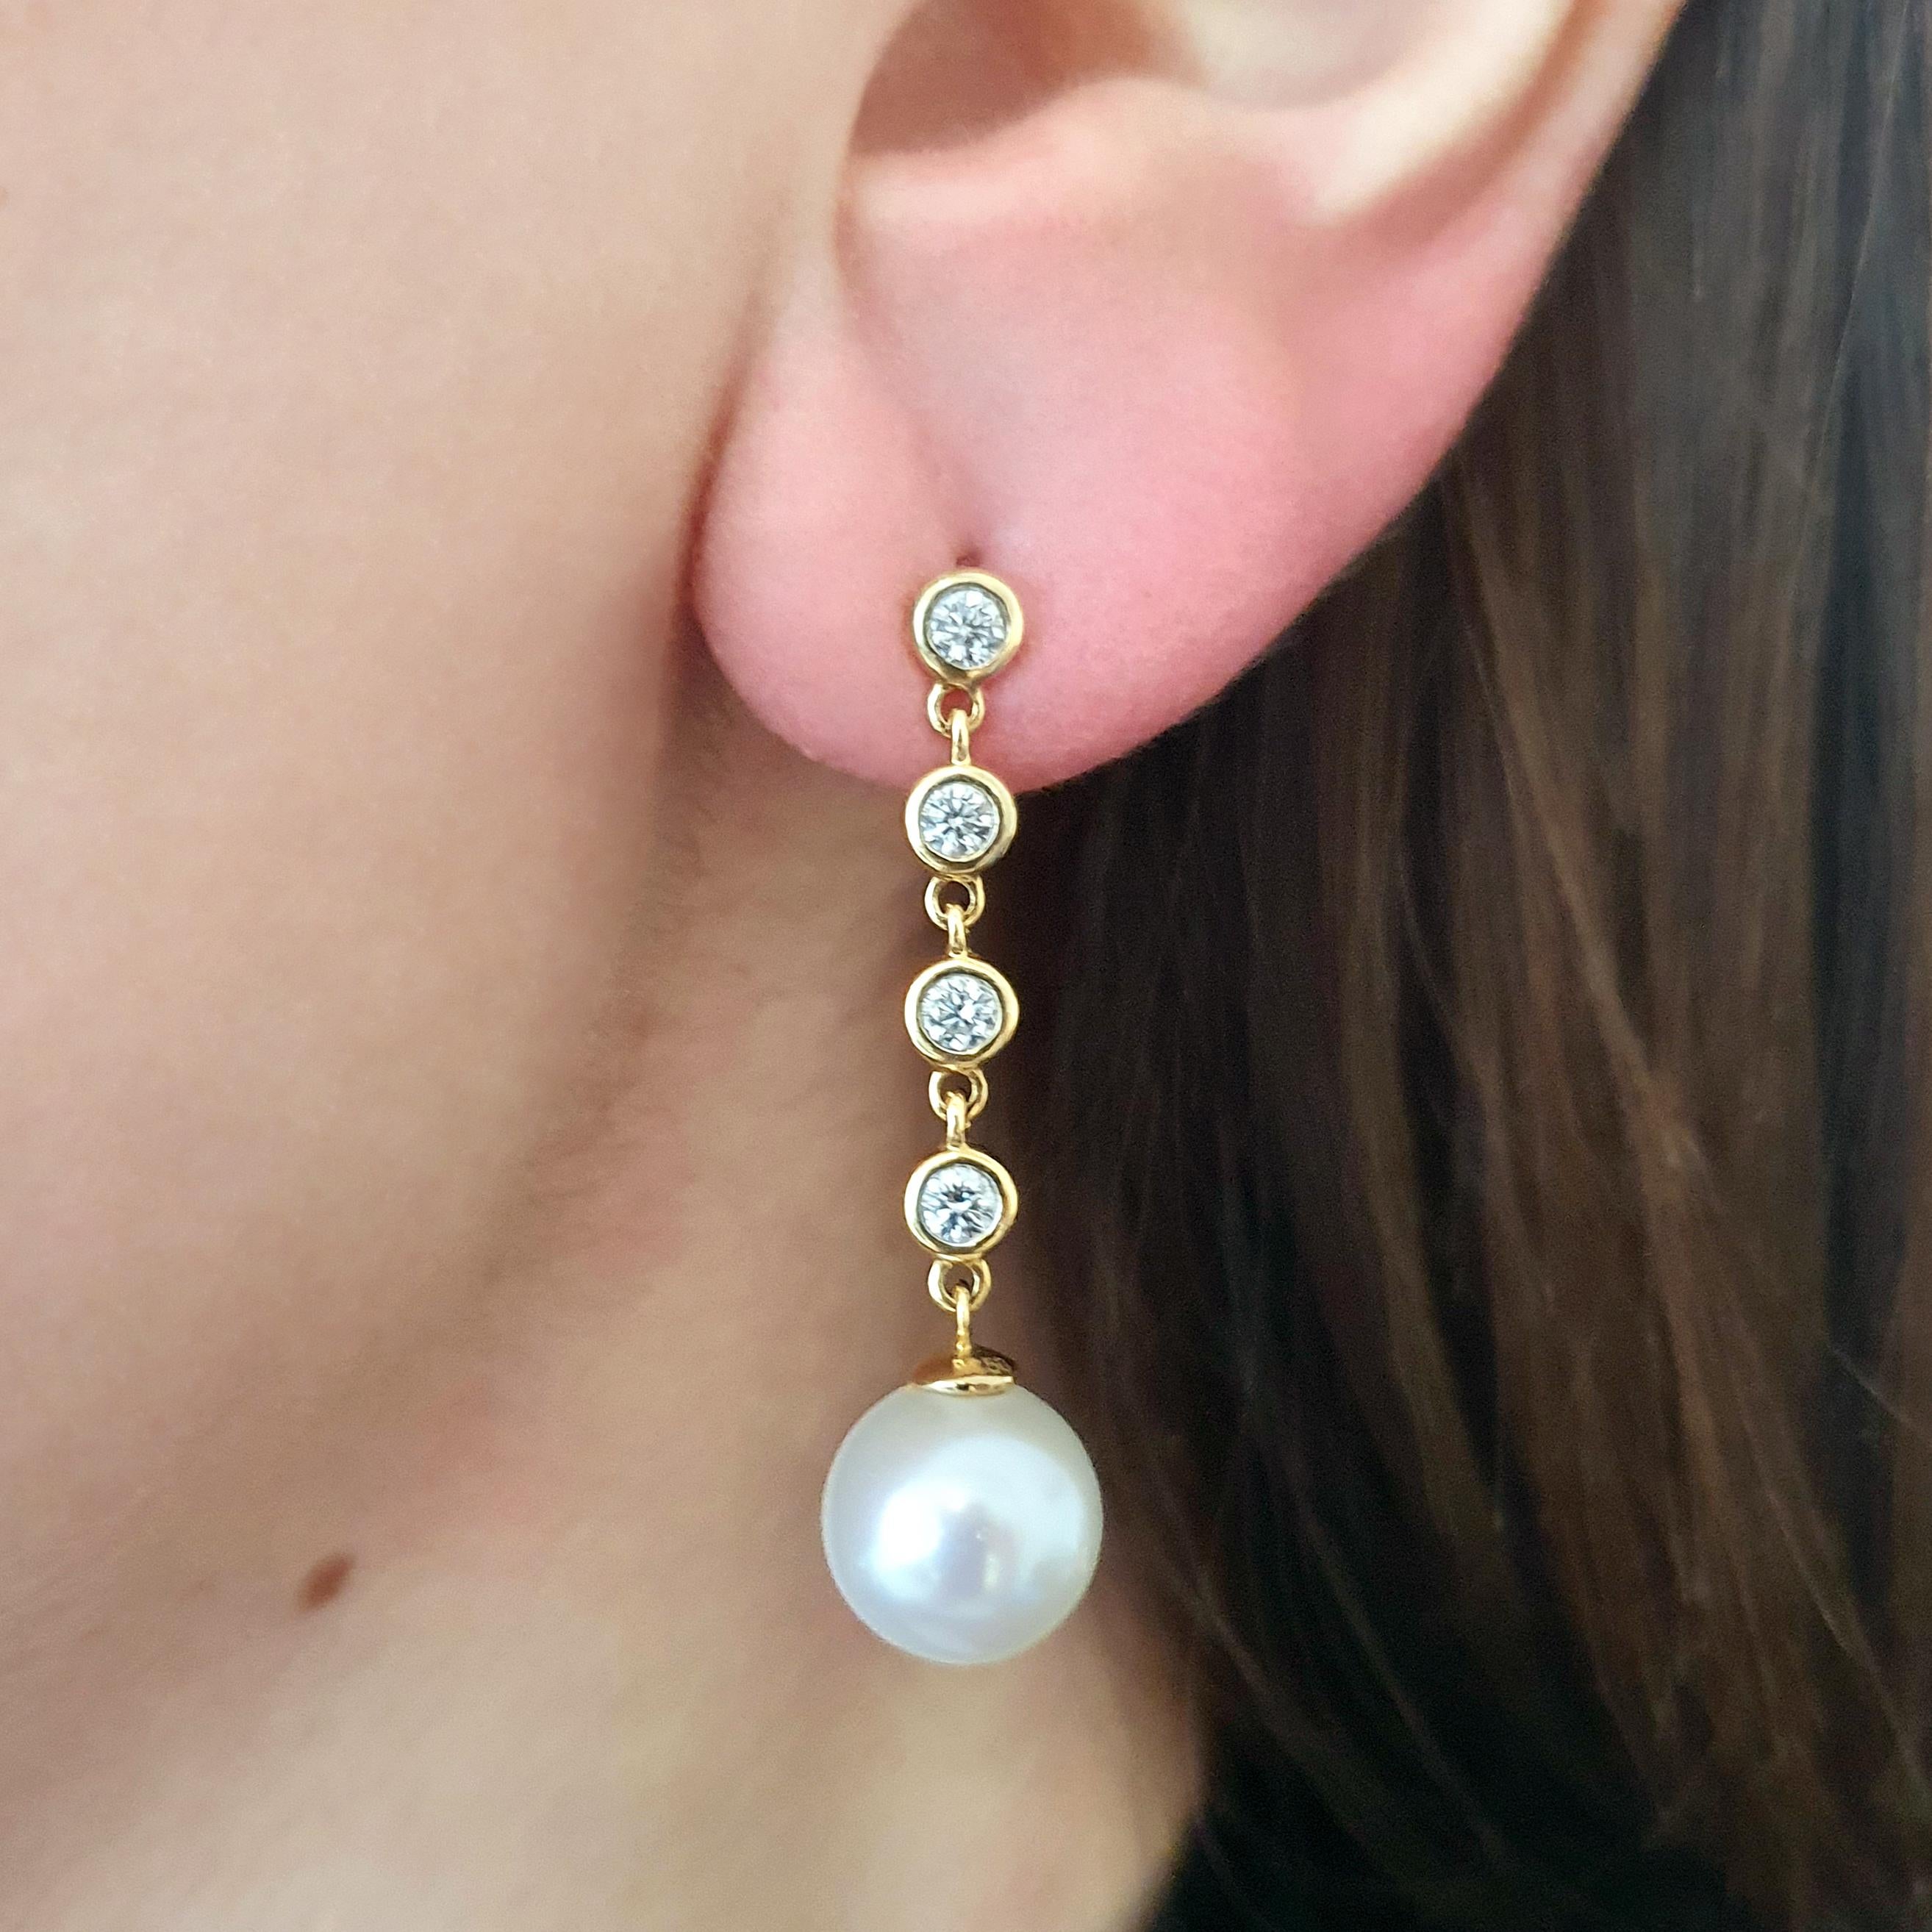 Pearl and Diamond on Yellow Gold Earrings Ear Pendants.
Total height: 1.38 inch (3.50 centimeters).
Total weight: 5.60 grams.